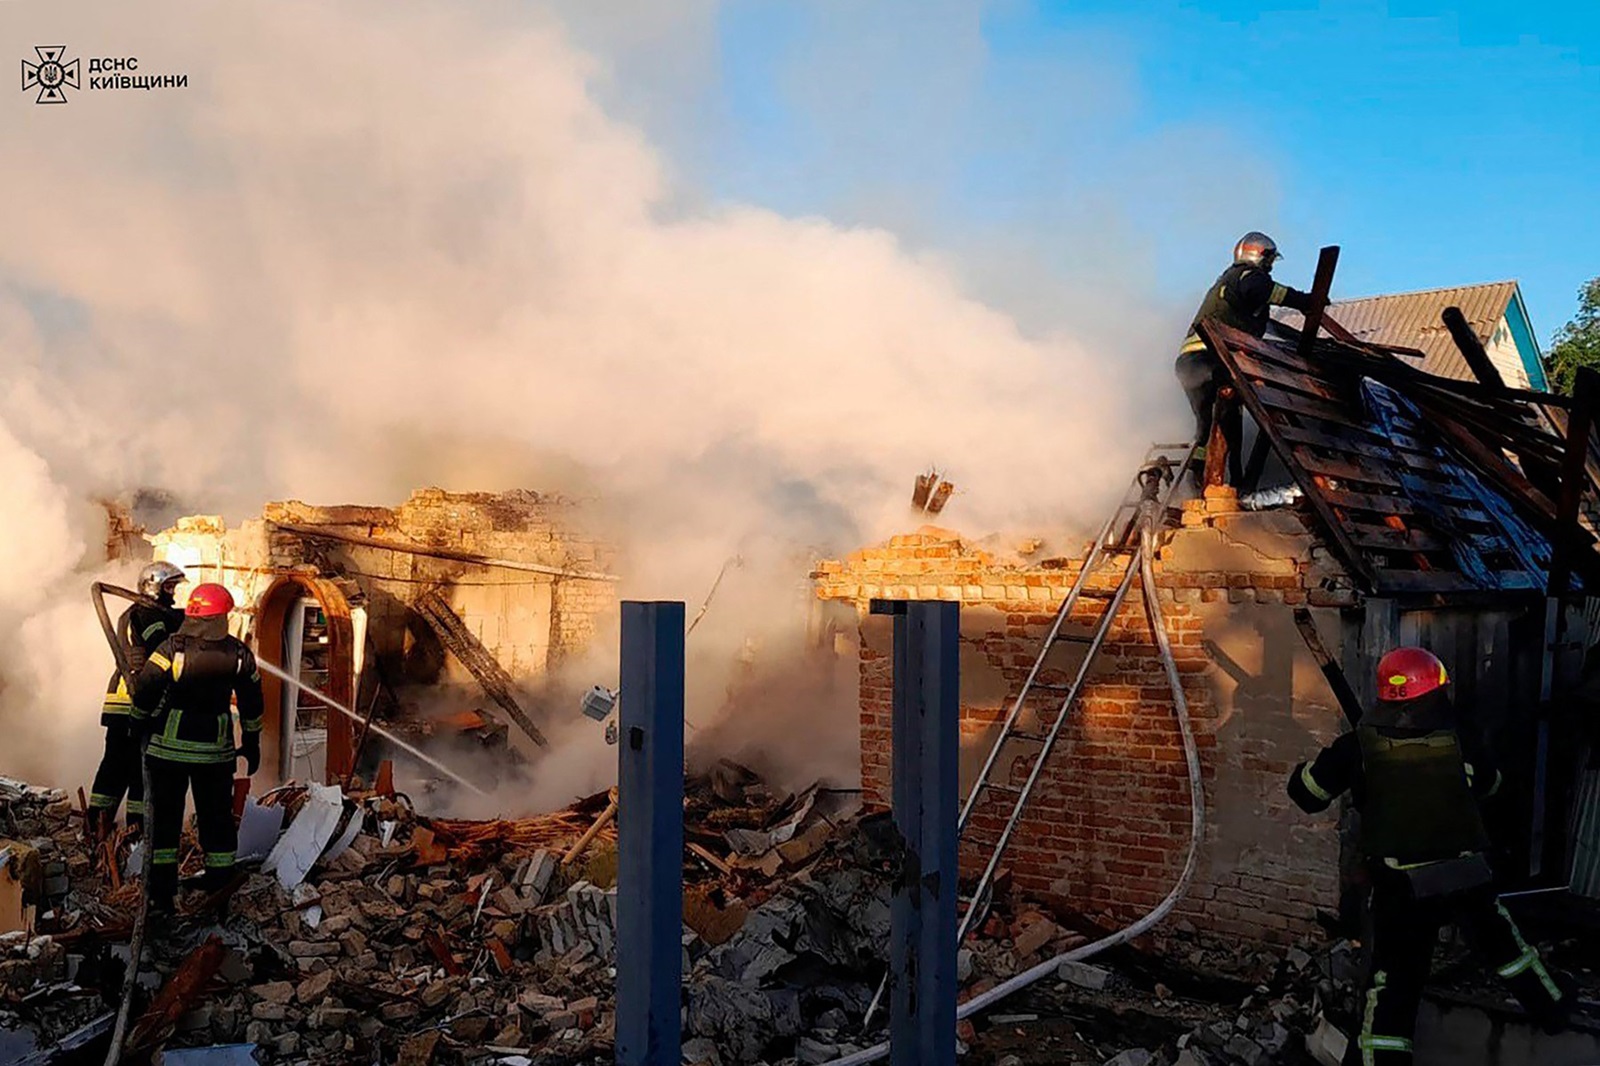 This handout photograph taken and released by Ukrainian Emergency Service on May 8, 2024, shows rescuers extinguishing a fire on a destroyed house following a missile attack in Kyiv region, amid the Russian invasion of Ukraine. Ukraine's air force on May 8, 2024 said it had downed dozens of Russian missiles and drones fired in an overnight barrage that targeted Ukrainian energy facilities.,Image: 871101295, License: Rights-managed, Restrictions: RESTRICTED TO EDITORIAL USE - MANDATORY CREDIT "AFP PHOTO / UKRAINIAN EMERGENCY SERVICE" - NO MARKETING NO ADVERTISING CAMPAIGNS - DISTRIBUTED AS A SERVICE TO CLIENTS, ***
HANDOUT image or SOCIAL MEDIA IMAGE or FILMSTILL for EDITORIAL USE ONLY! * Please note: Fees charged by Profimedia are for the Profimedia's services only, and do not, nor are they intended to, convey to the user any ownership of Copyright or License in the material. Profimedia does not claim any ownership including but not limited to Copyright or License in the attached material. By publishing this material you (the user) expressly agree to indemnify and to hold Profimedia and its directors, shareholders and employees harmless from any loss, claims, damages, demands, expenses (including legal fees), or any causes of action or allegation against Profimedia arising out of or connected in any way with publication of the material. Profimedia does not claim any copyright or license in the attached materials. Any downloading fees charged by Profimedia are for Profimedia's services only. * Handling Fee Only 
***, Model Release: no, Credit line: Handout / AFP / Profimedia